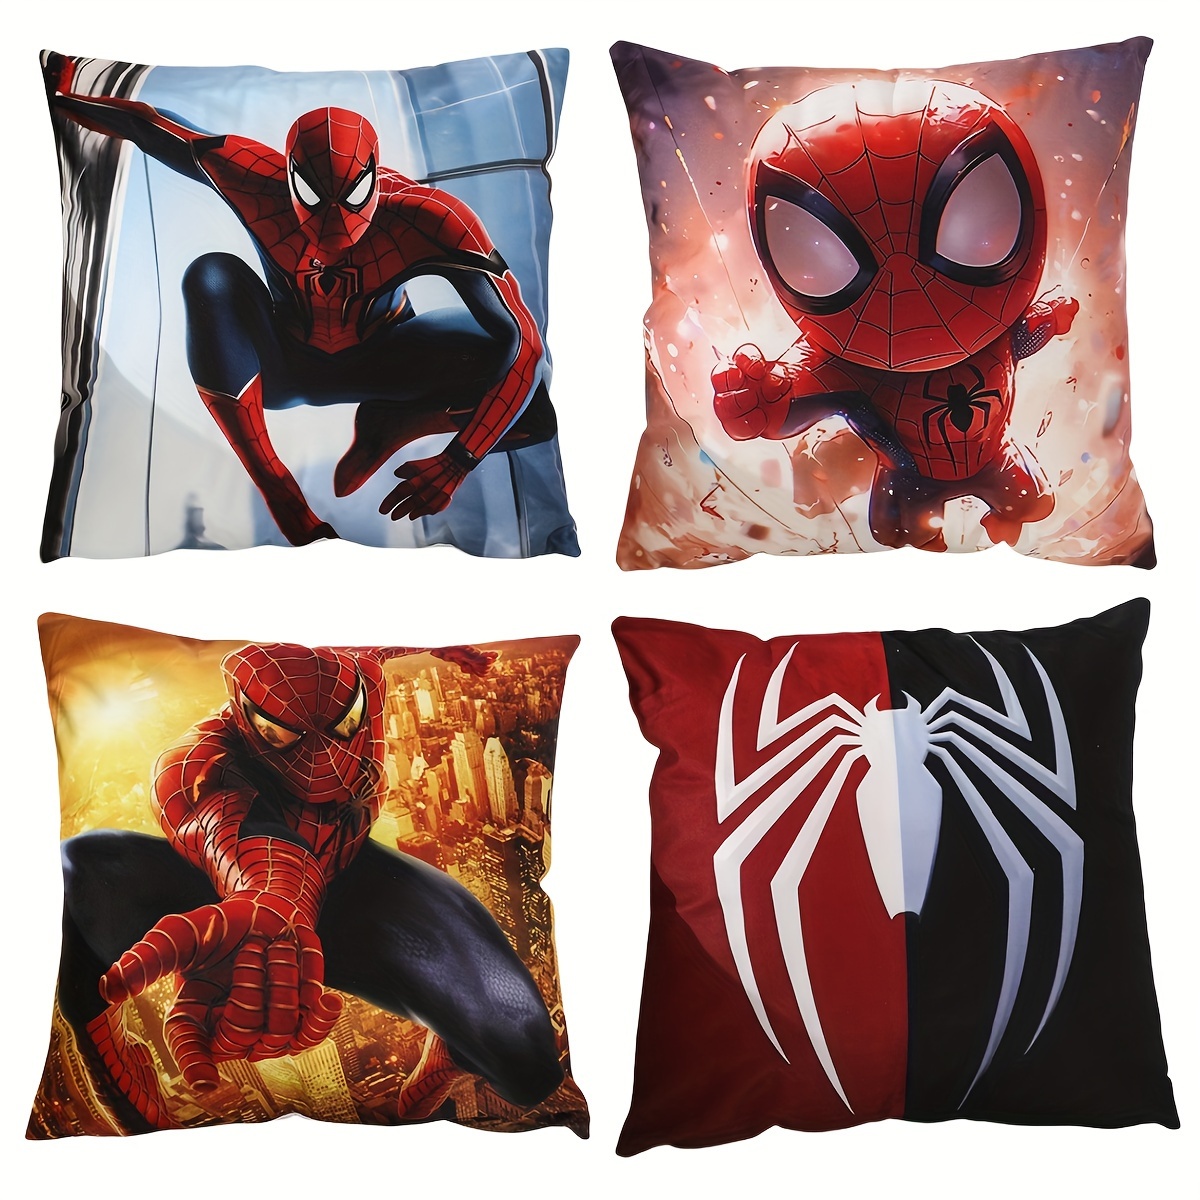 

Disney Spider-man Throw Pillow Cover, 18x18 Inches - Single-sided Print, Zip Closure, Machine Washable, Perfect For Living Room & Bedroom Decor (pillow Not Included)